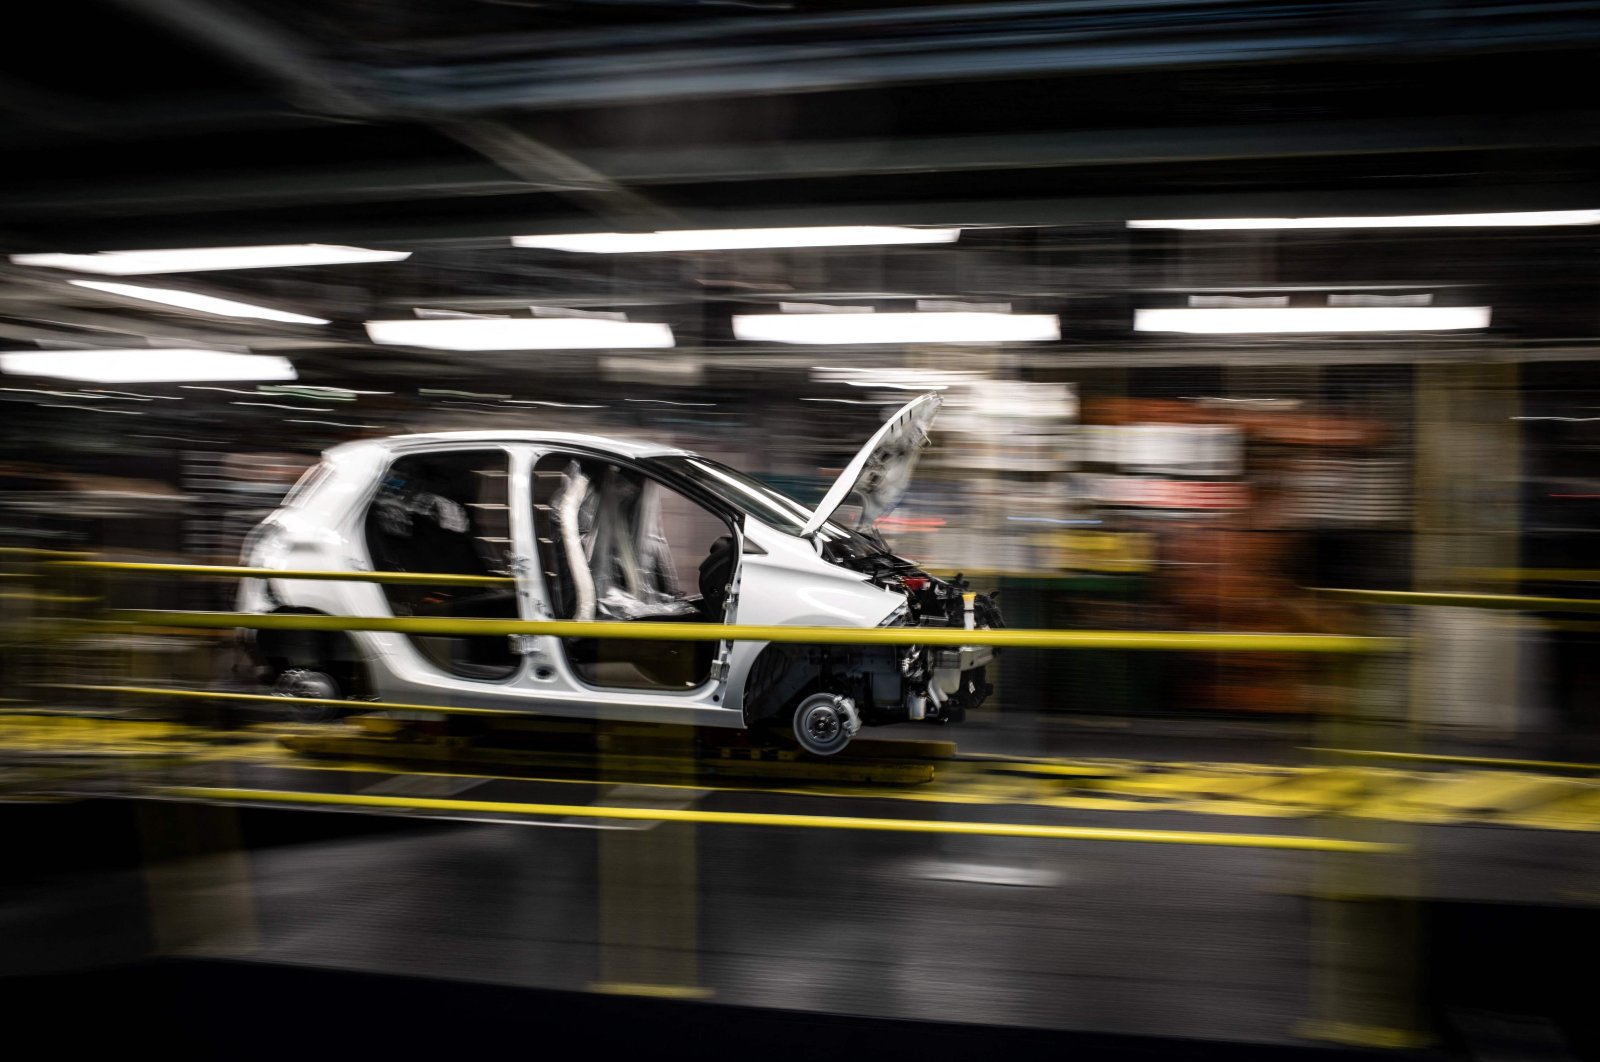 The assembly line producing both the electric car Renault Zoe and the hybrid vehicle Nissan Micra in Flins-sur-Seine, France, May 6, 2020. (AFP Photo)